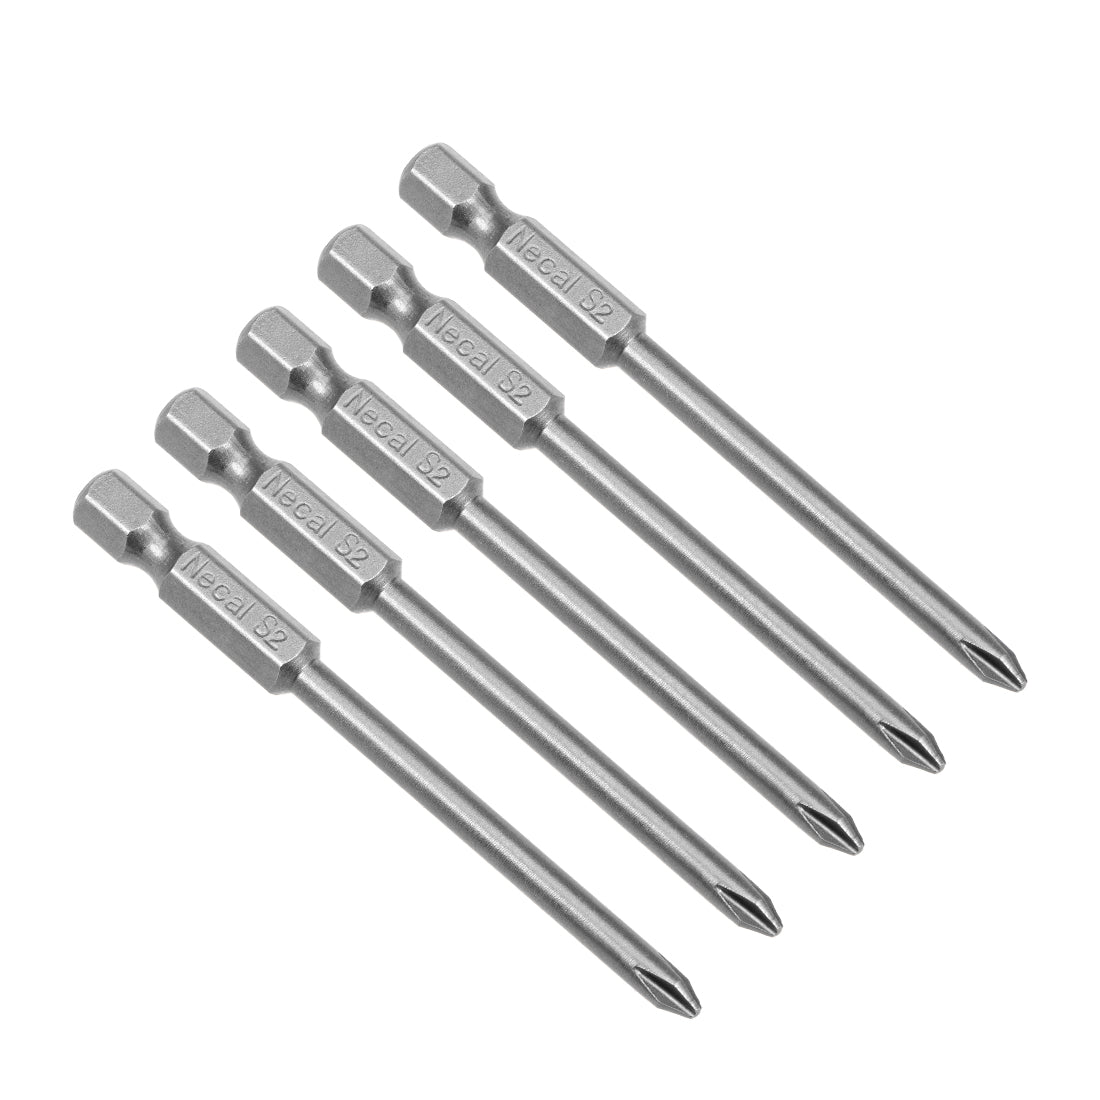 uxcell Uxcell 5 Pcs Magnetic Phillips Screwdriver Bits, Hex Shank S2 Steel Power Tool